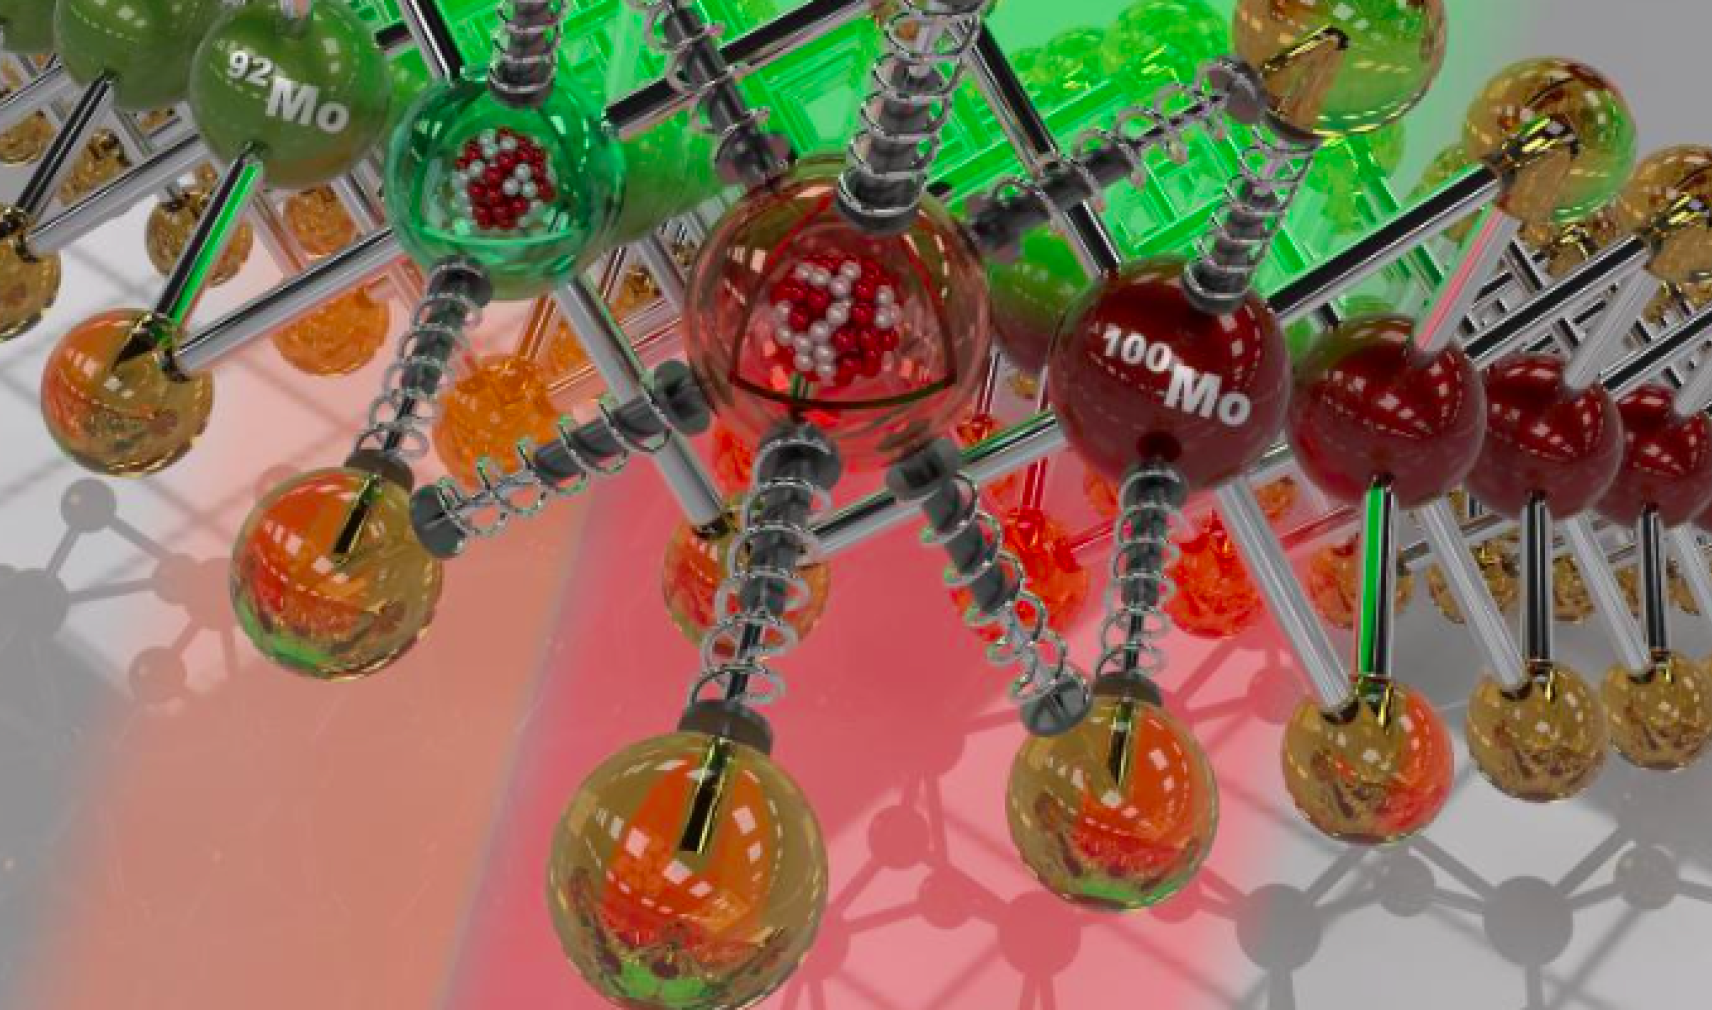 The tweaking of isotopes in molybdenum provided promising results that may help with the development of next-generation computing technologies (Image: ORNL)